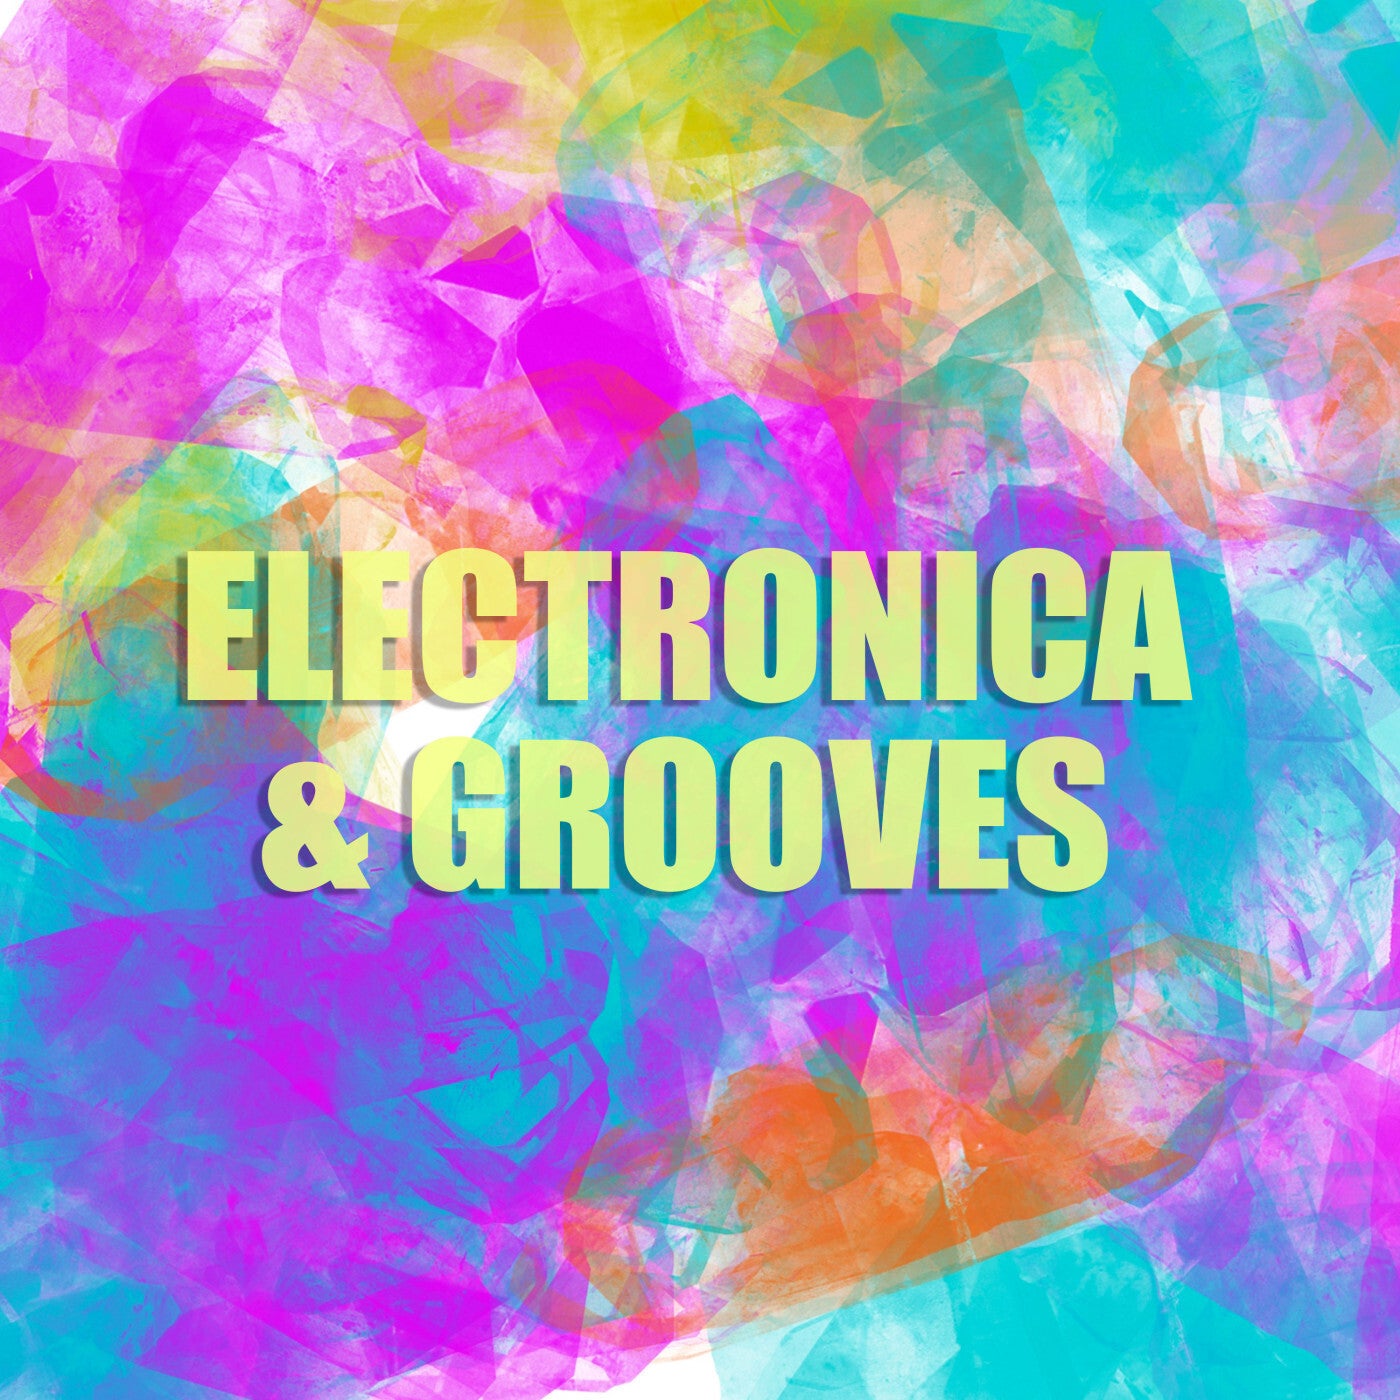 Electronica & Grooves